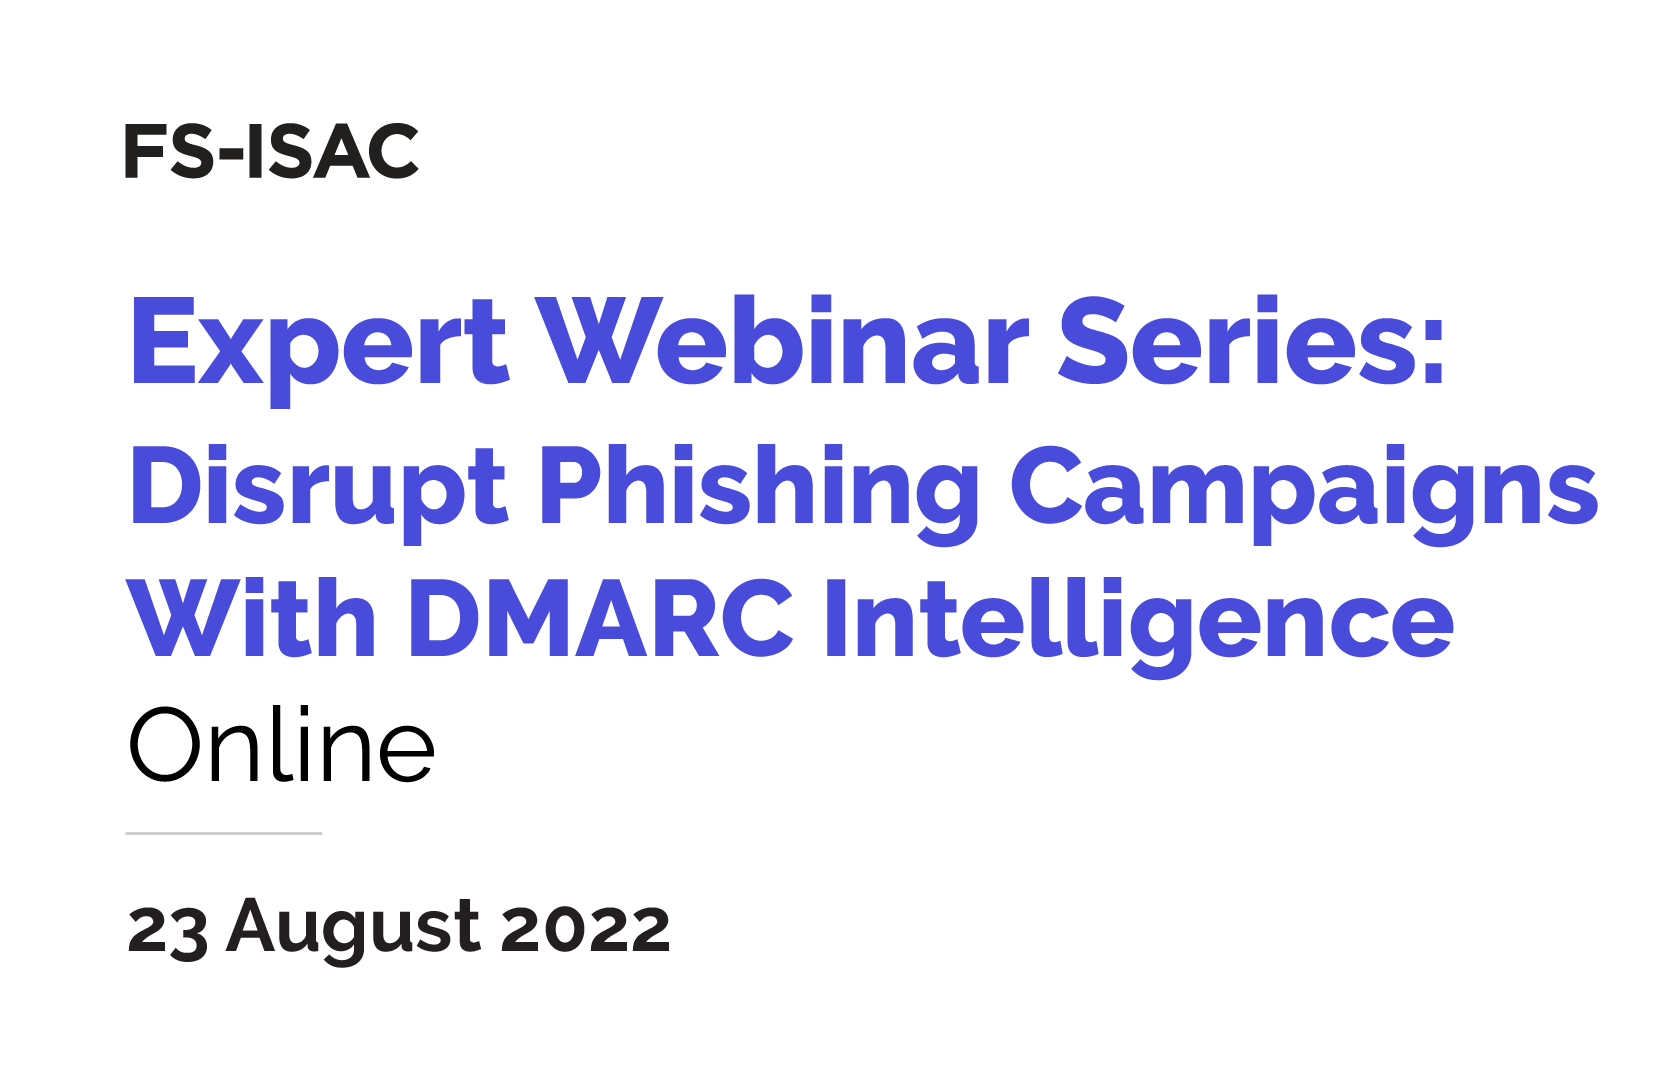 EWS132 - Disrupt Phishing Campaigns with DMARC Intelligence